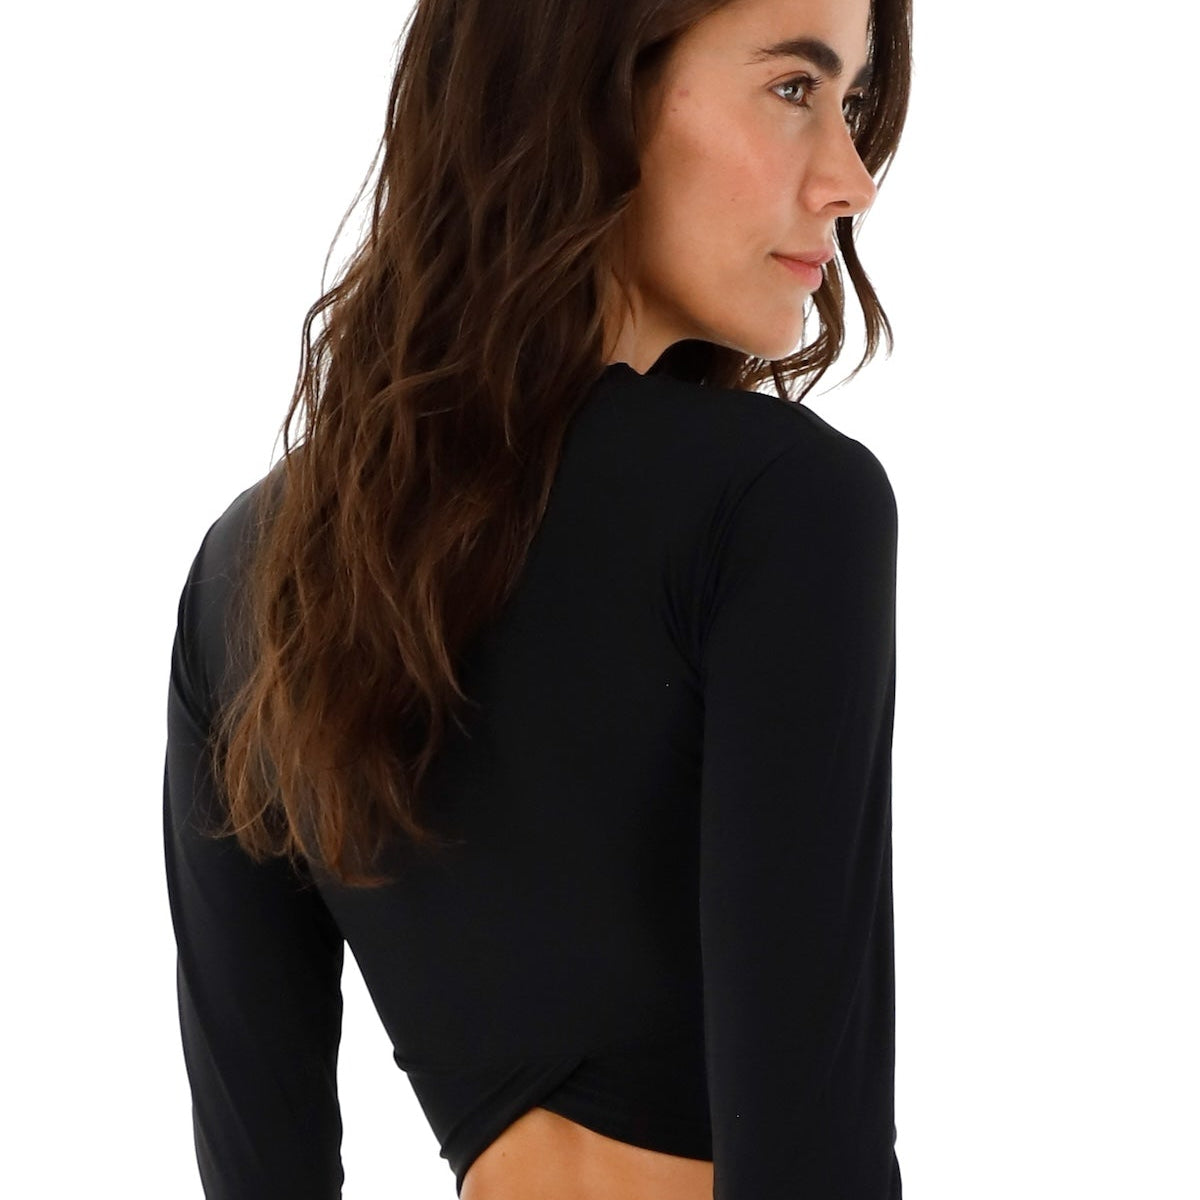 Woman wearing a black rashguard and swimsuit bottoms. She's standing against a white background. The purpose of this image is to highlight the swimsuit.